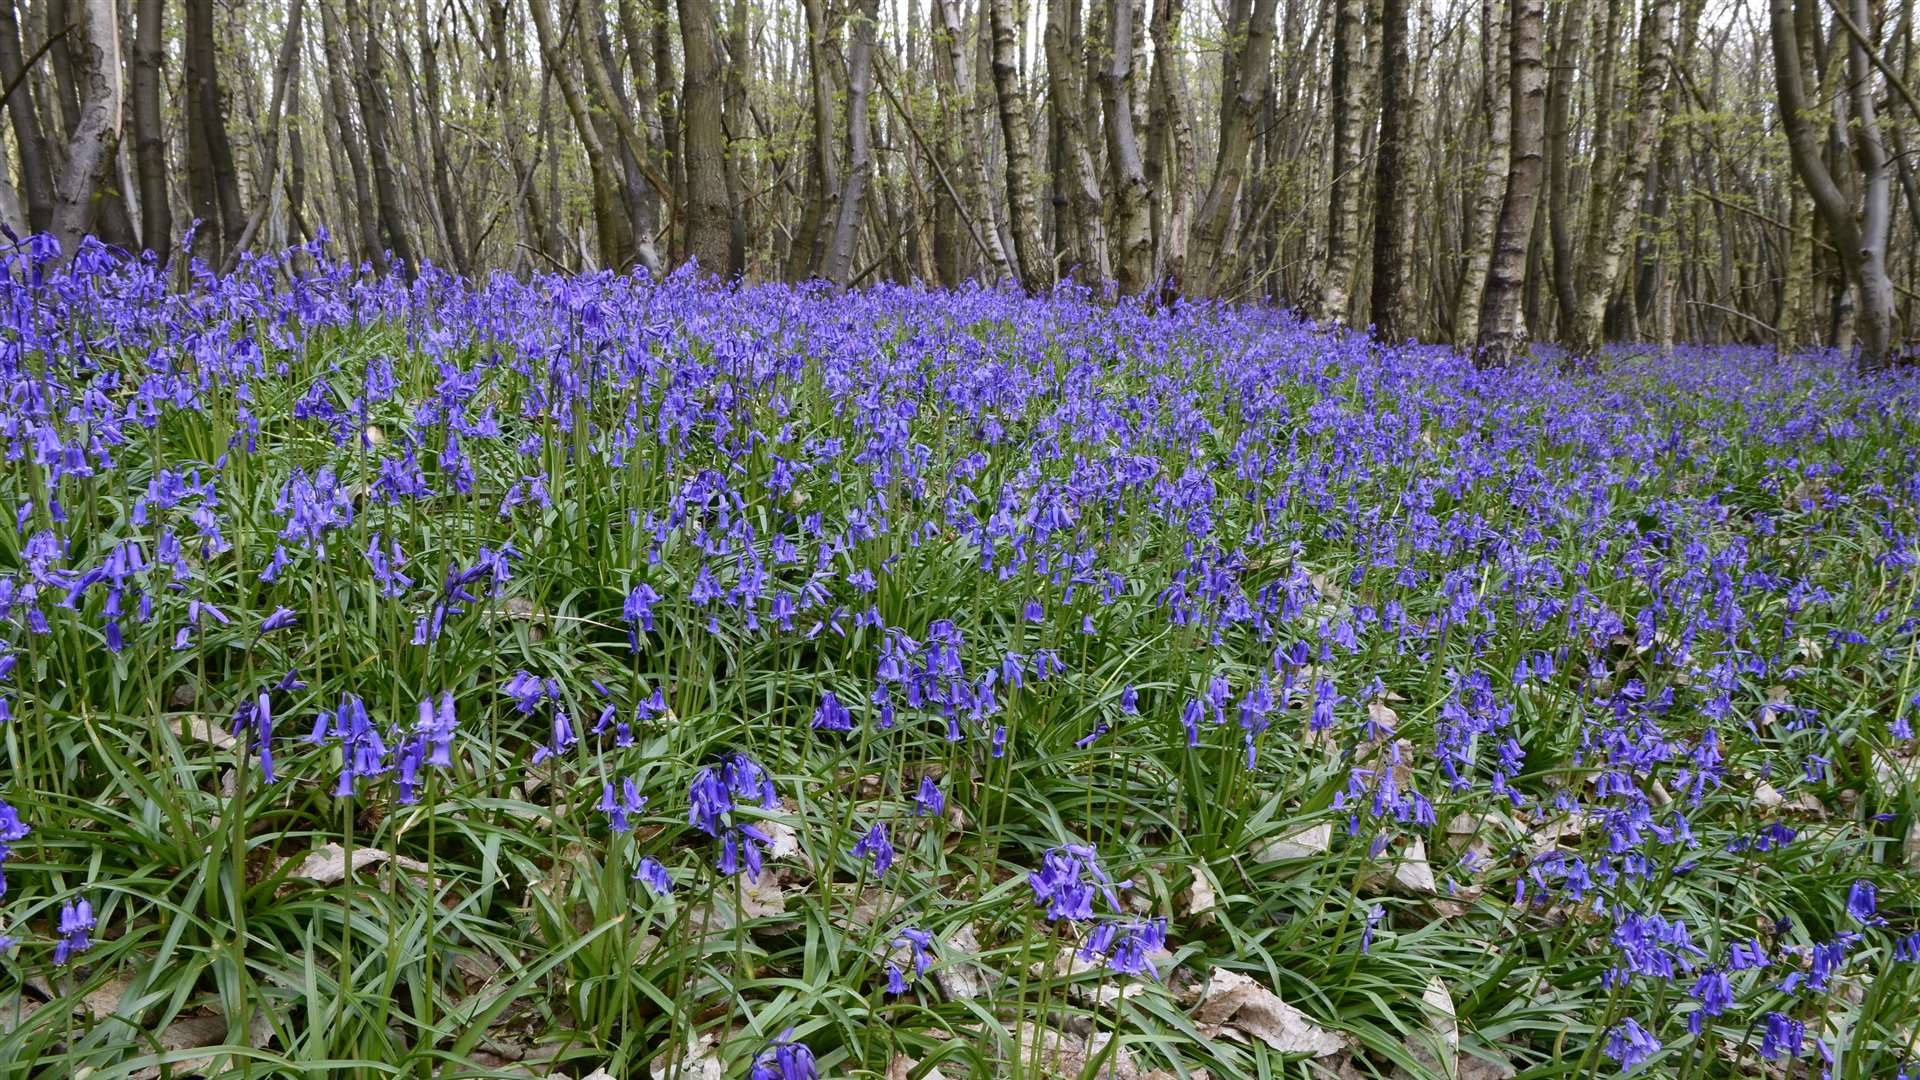 Carpet of bluebells in Kings Wood, Challock. Picture By Gary Browne